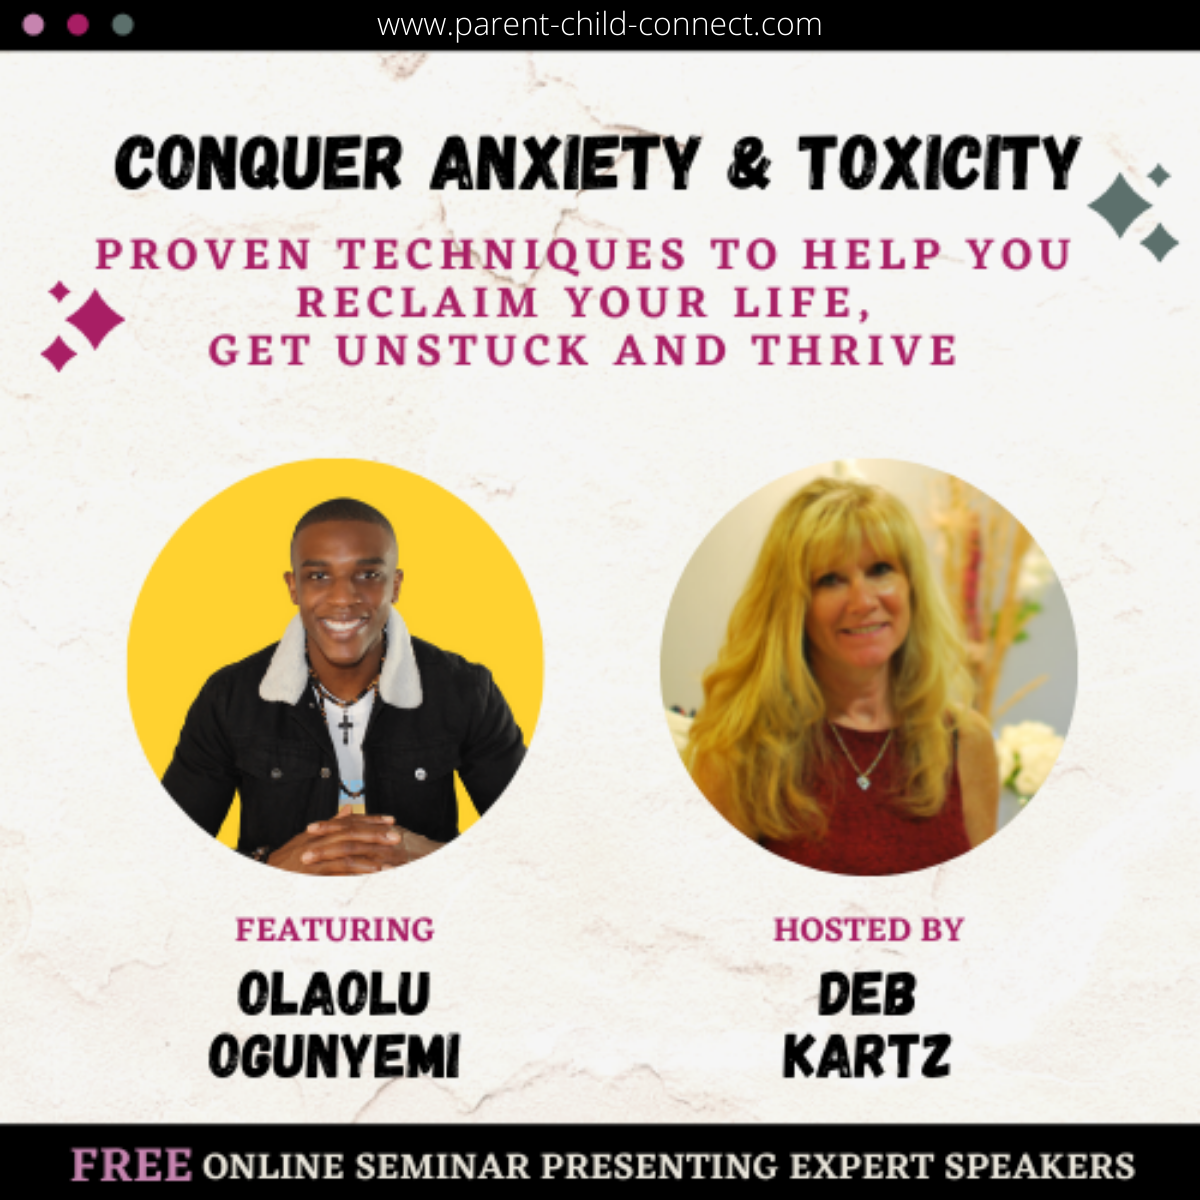 Update: Conquer Anxiety & Toxicity